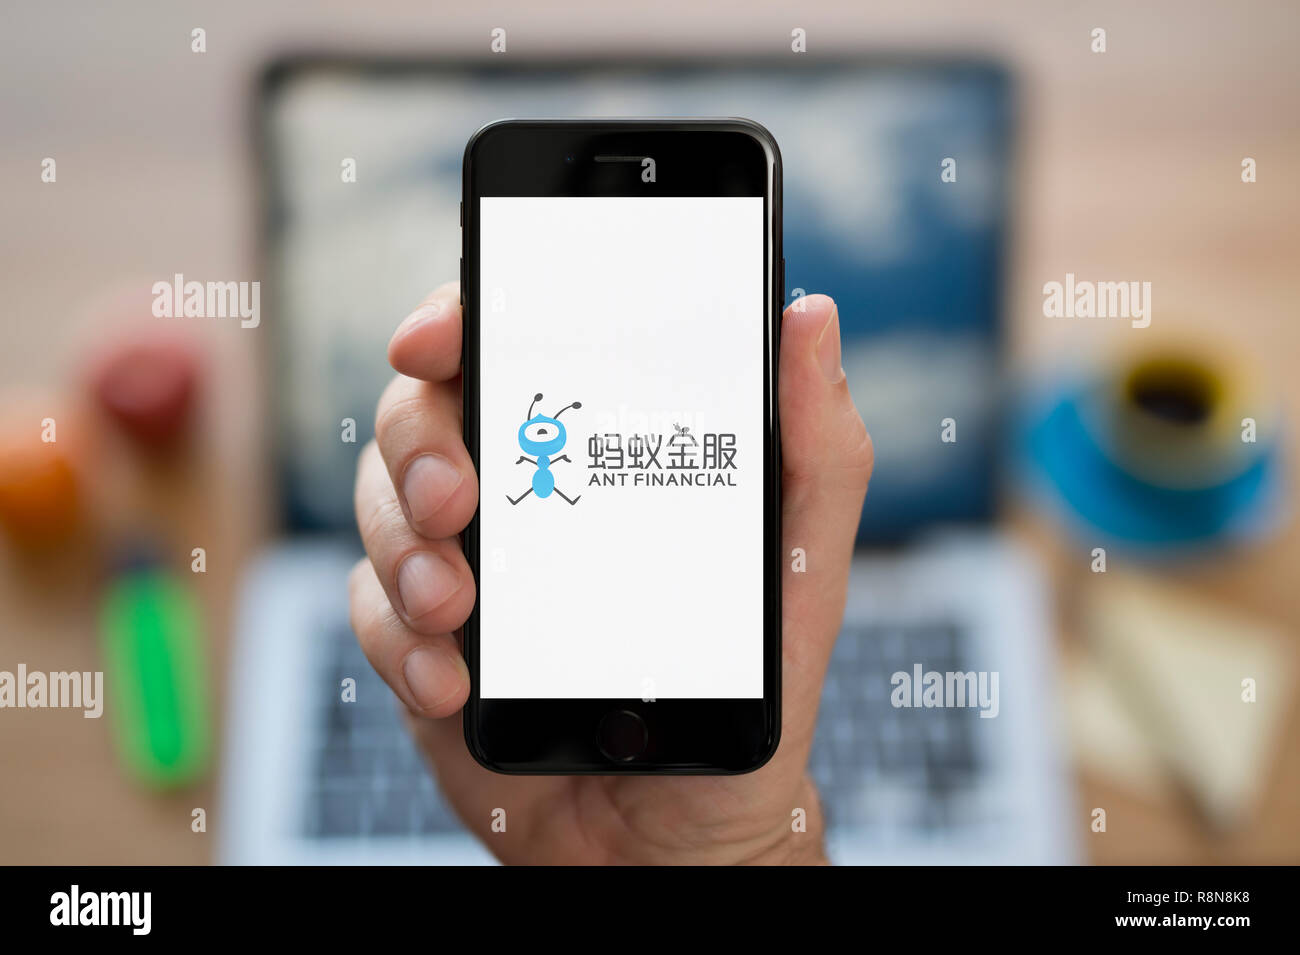 A man looks at his iPhone which displays the Ant Financial logo (Editorial use only). Stock Photo